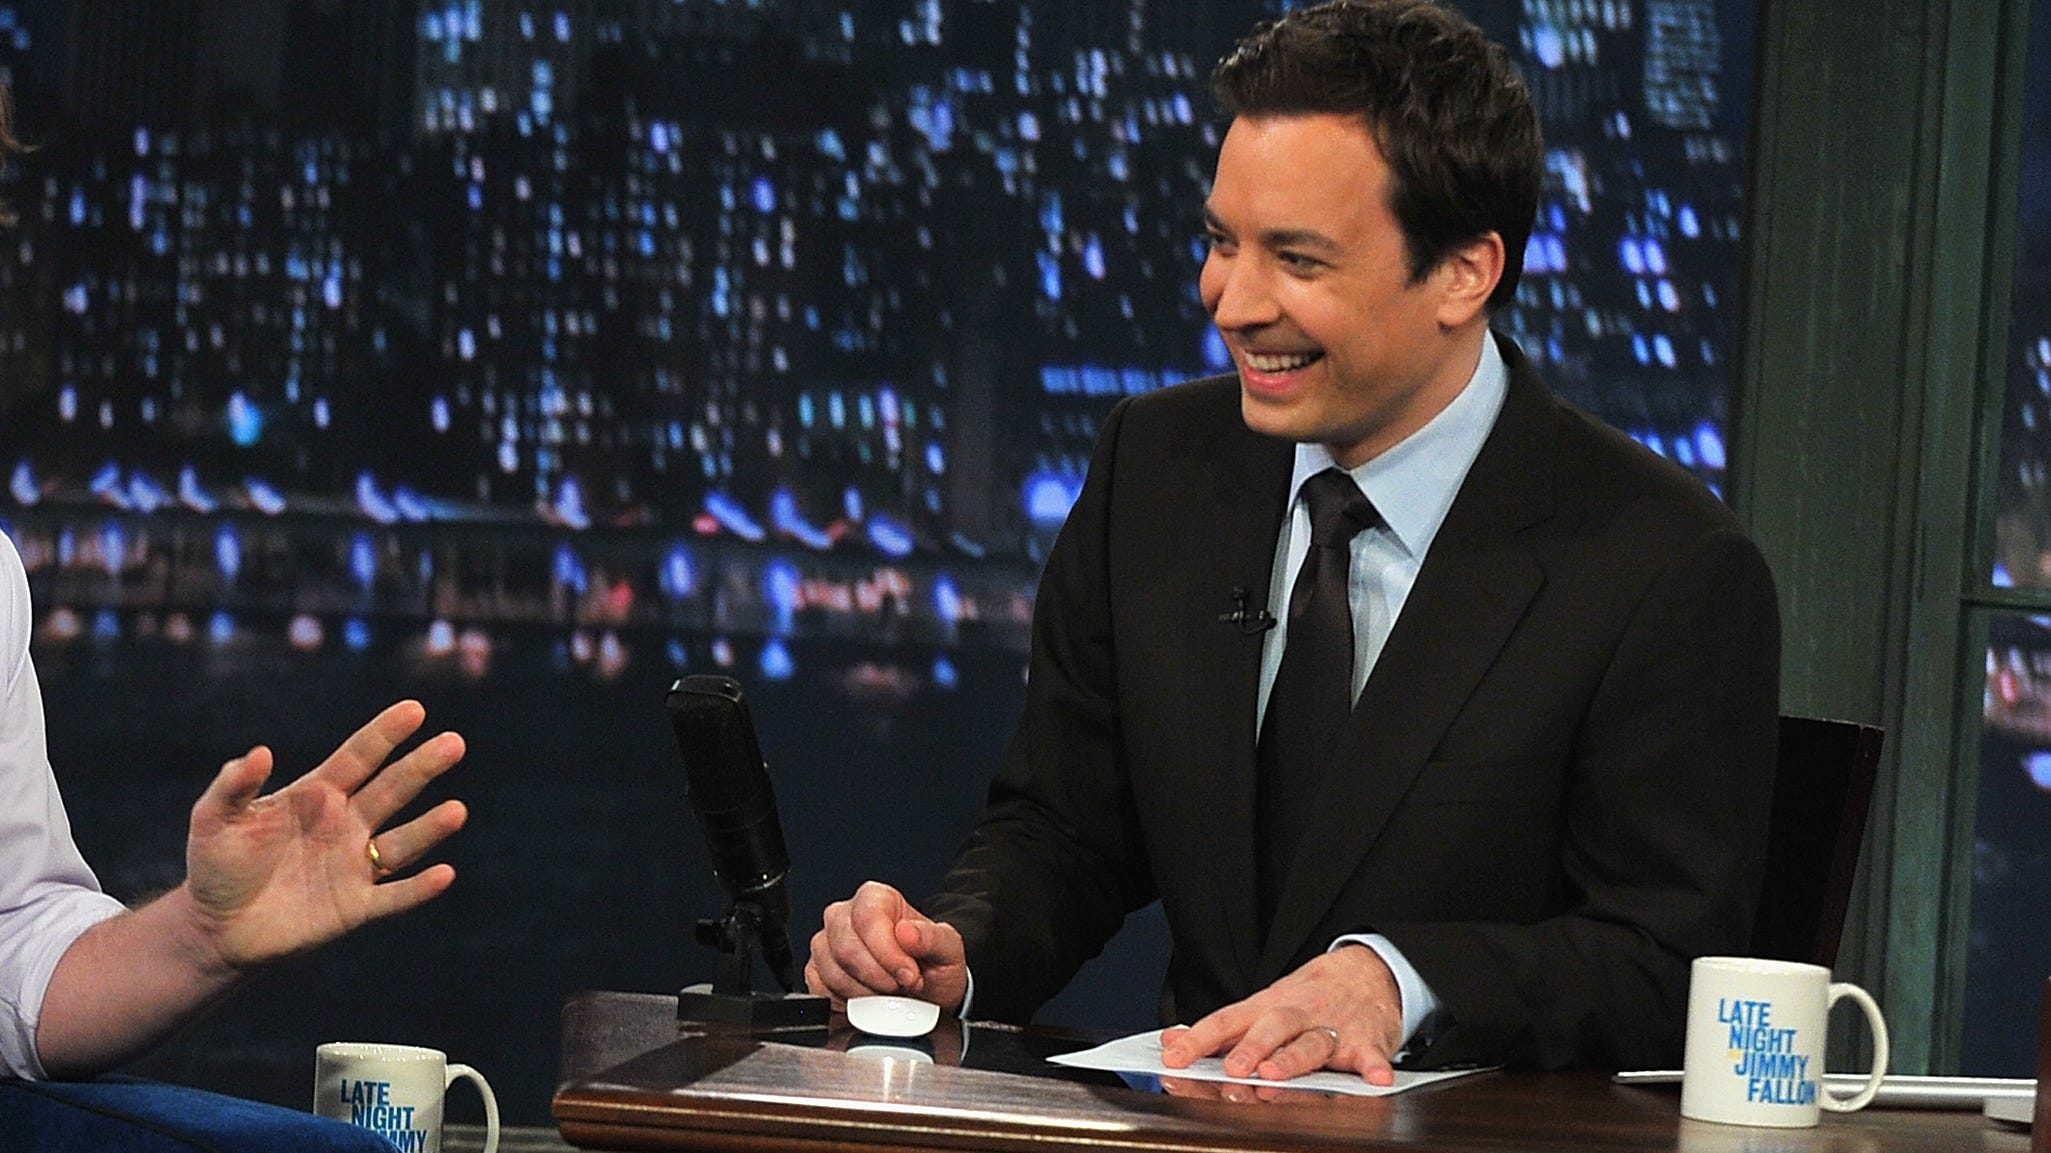 Jimmy Fallon is the first late night host to resume studio production